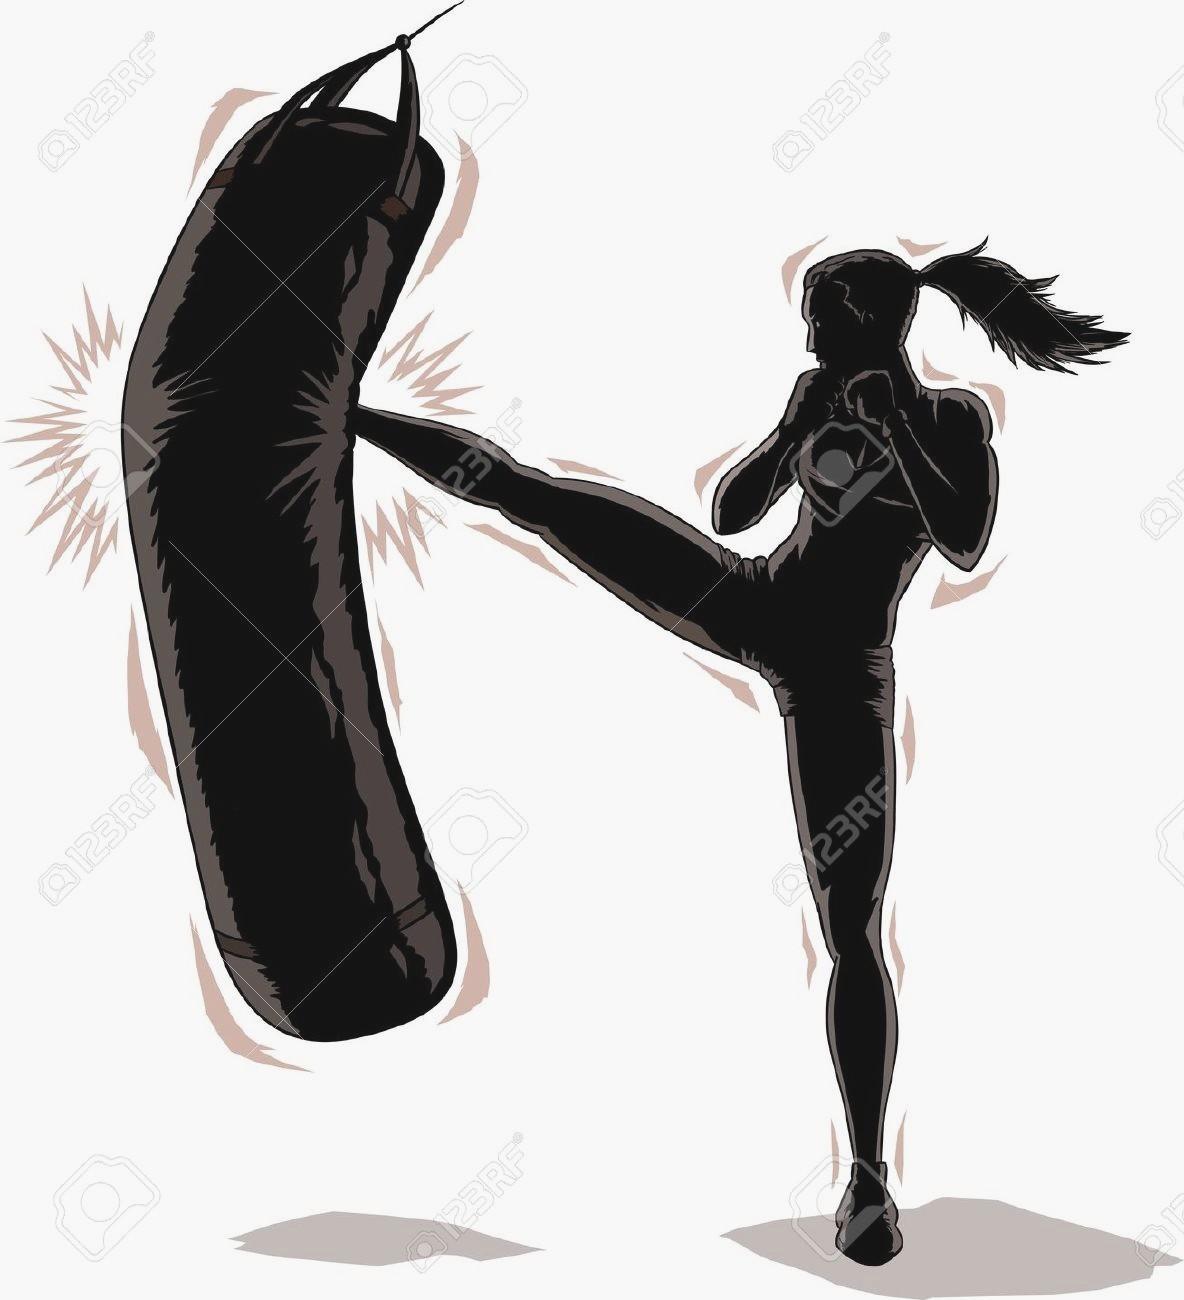 Kickboxing Wallpaper For Android